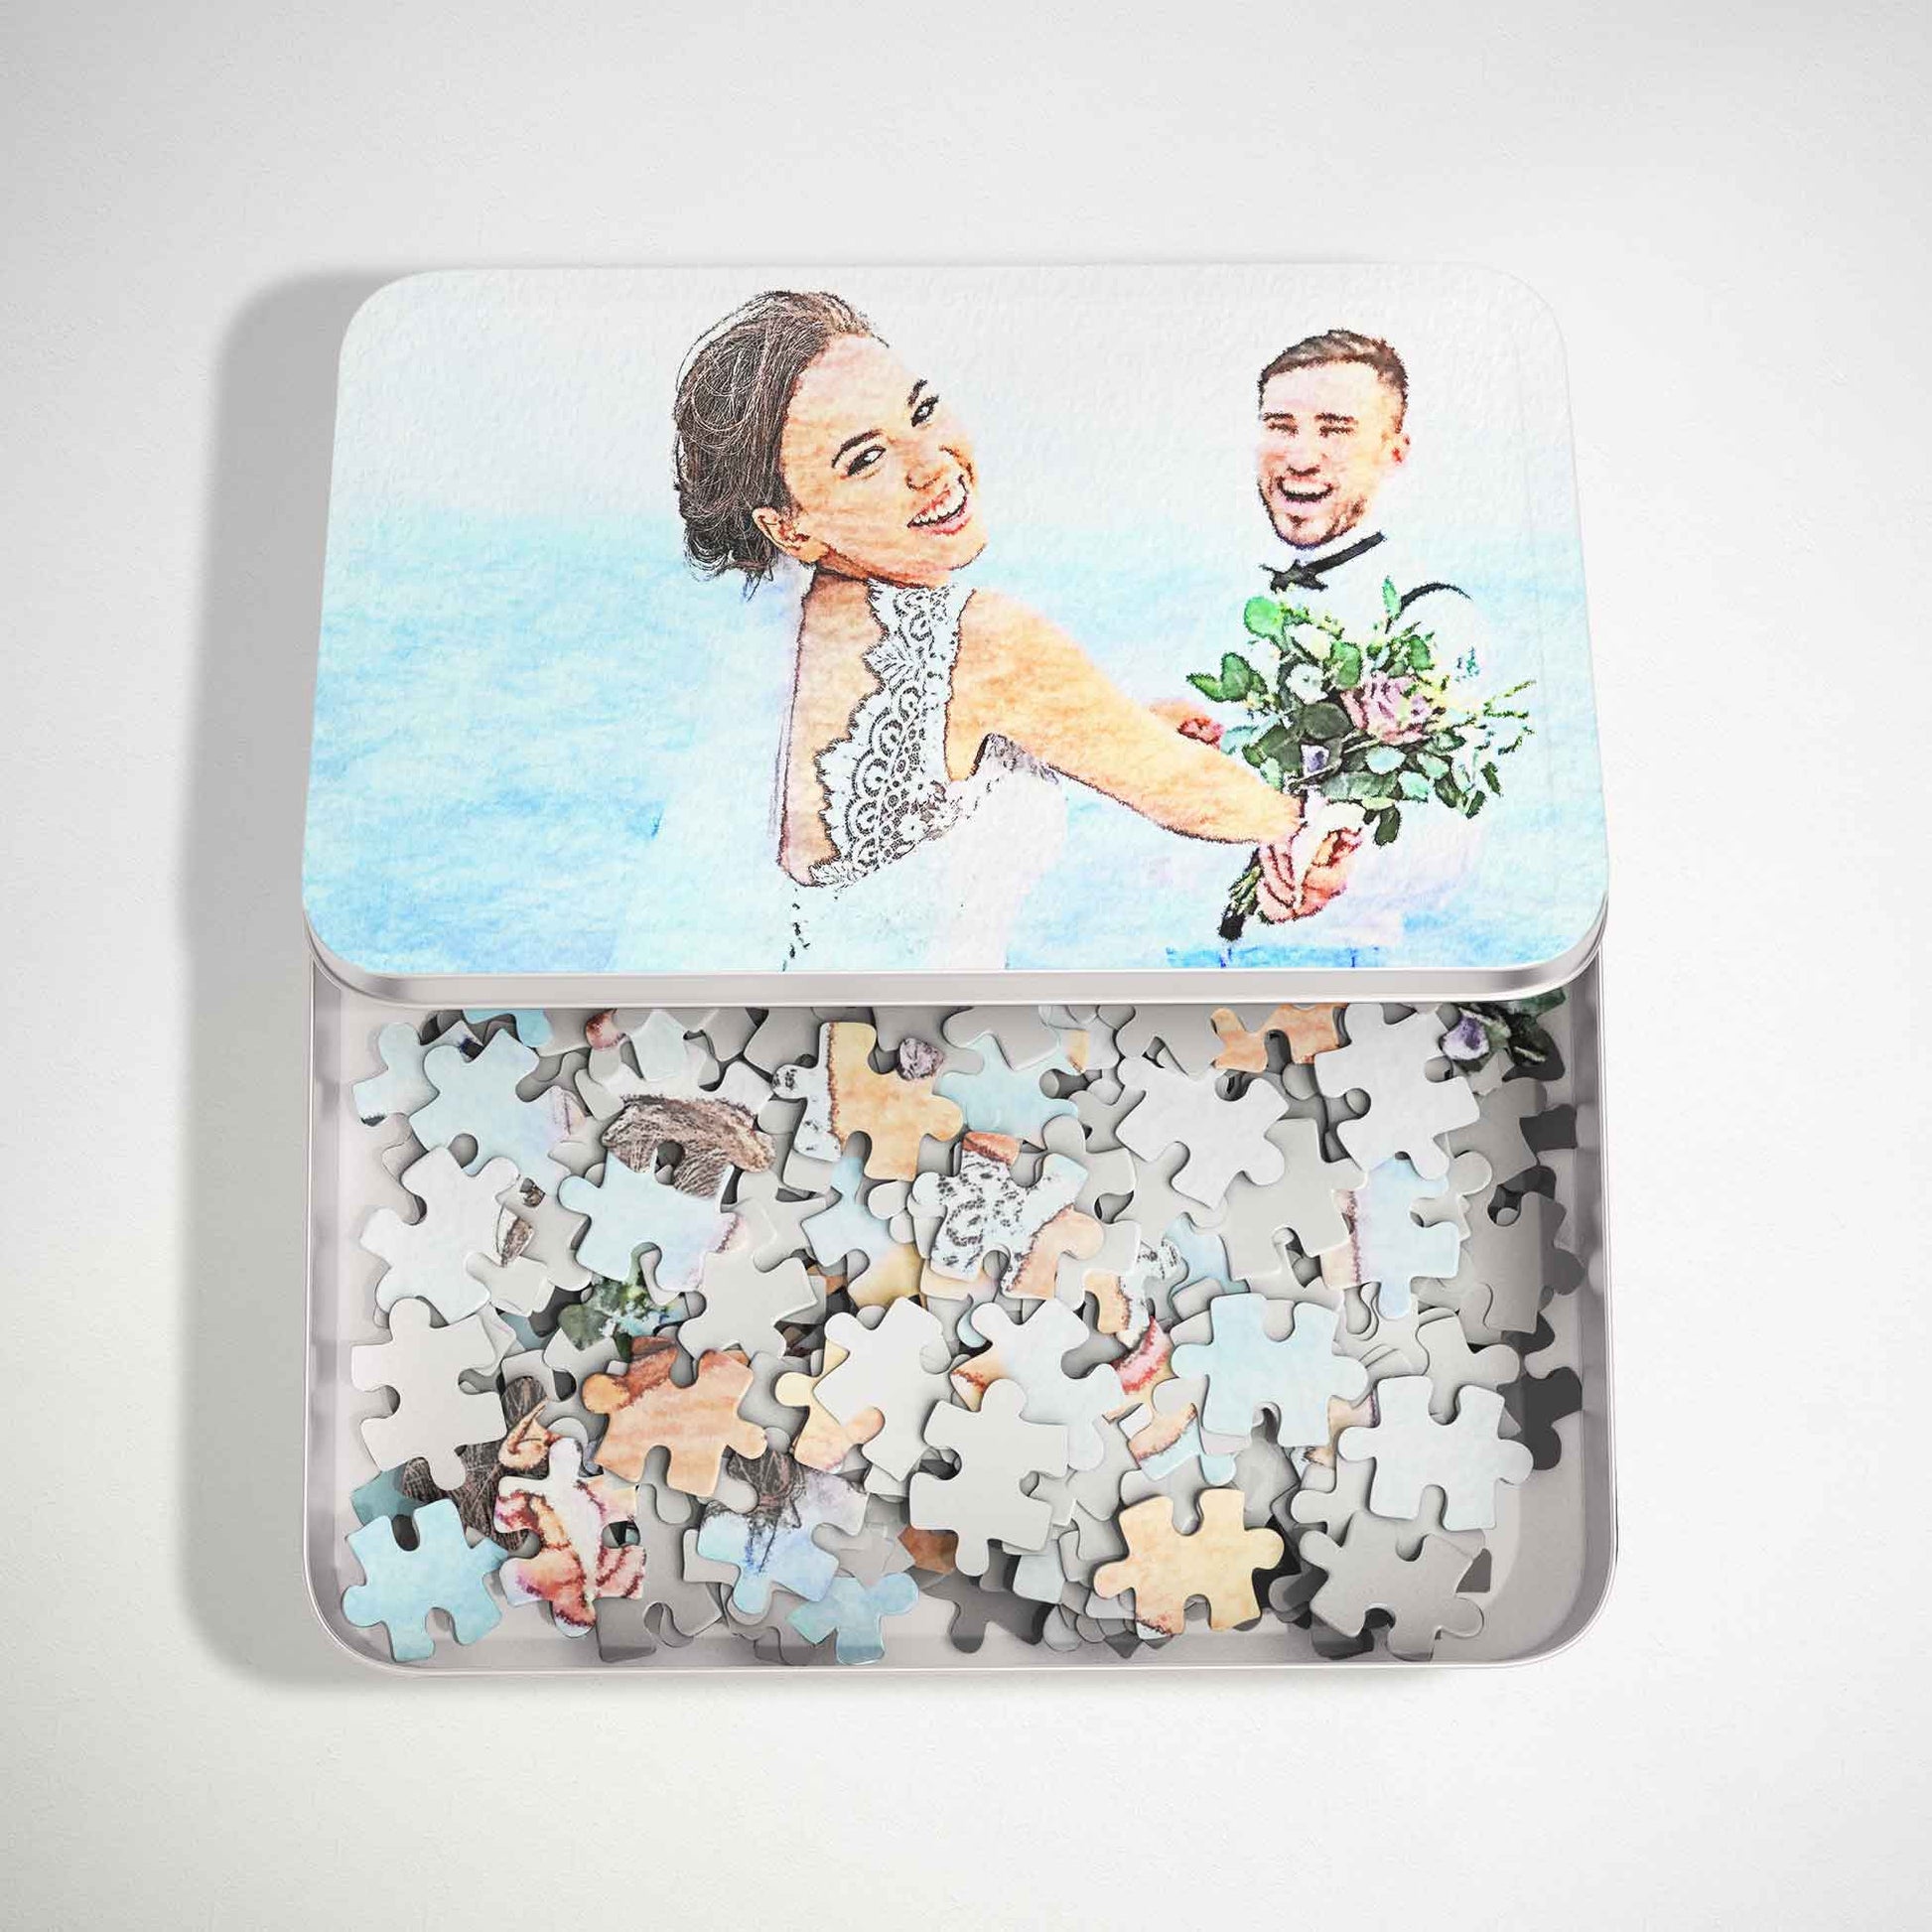 Discover the magic of a Personalised Watercolor Jigsaw Puzzle painting. The watercolour effect brings vibrant, vivid colours to life on a handmade wooden or cardboard puzzle. With its dye sublimation print, it embodies fun, happiness, and excitement